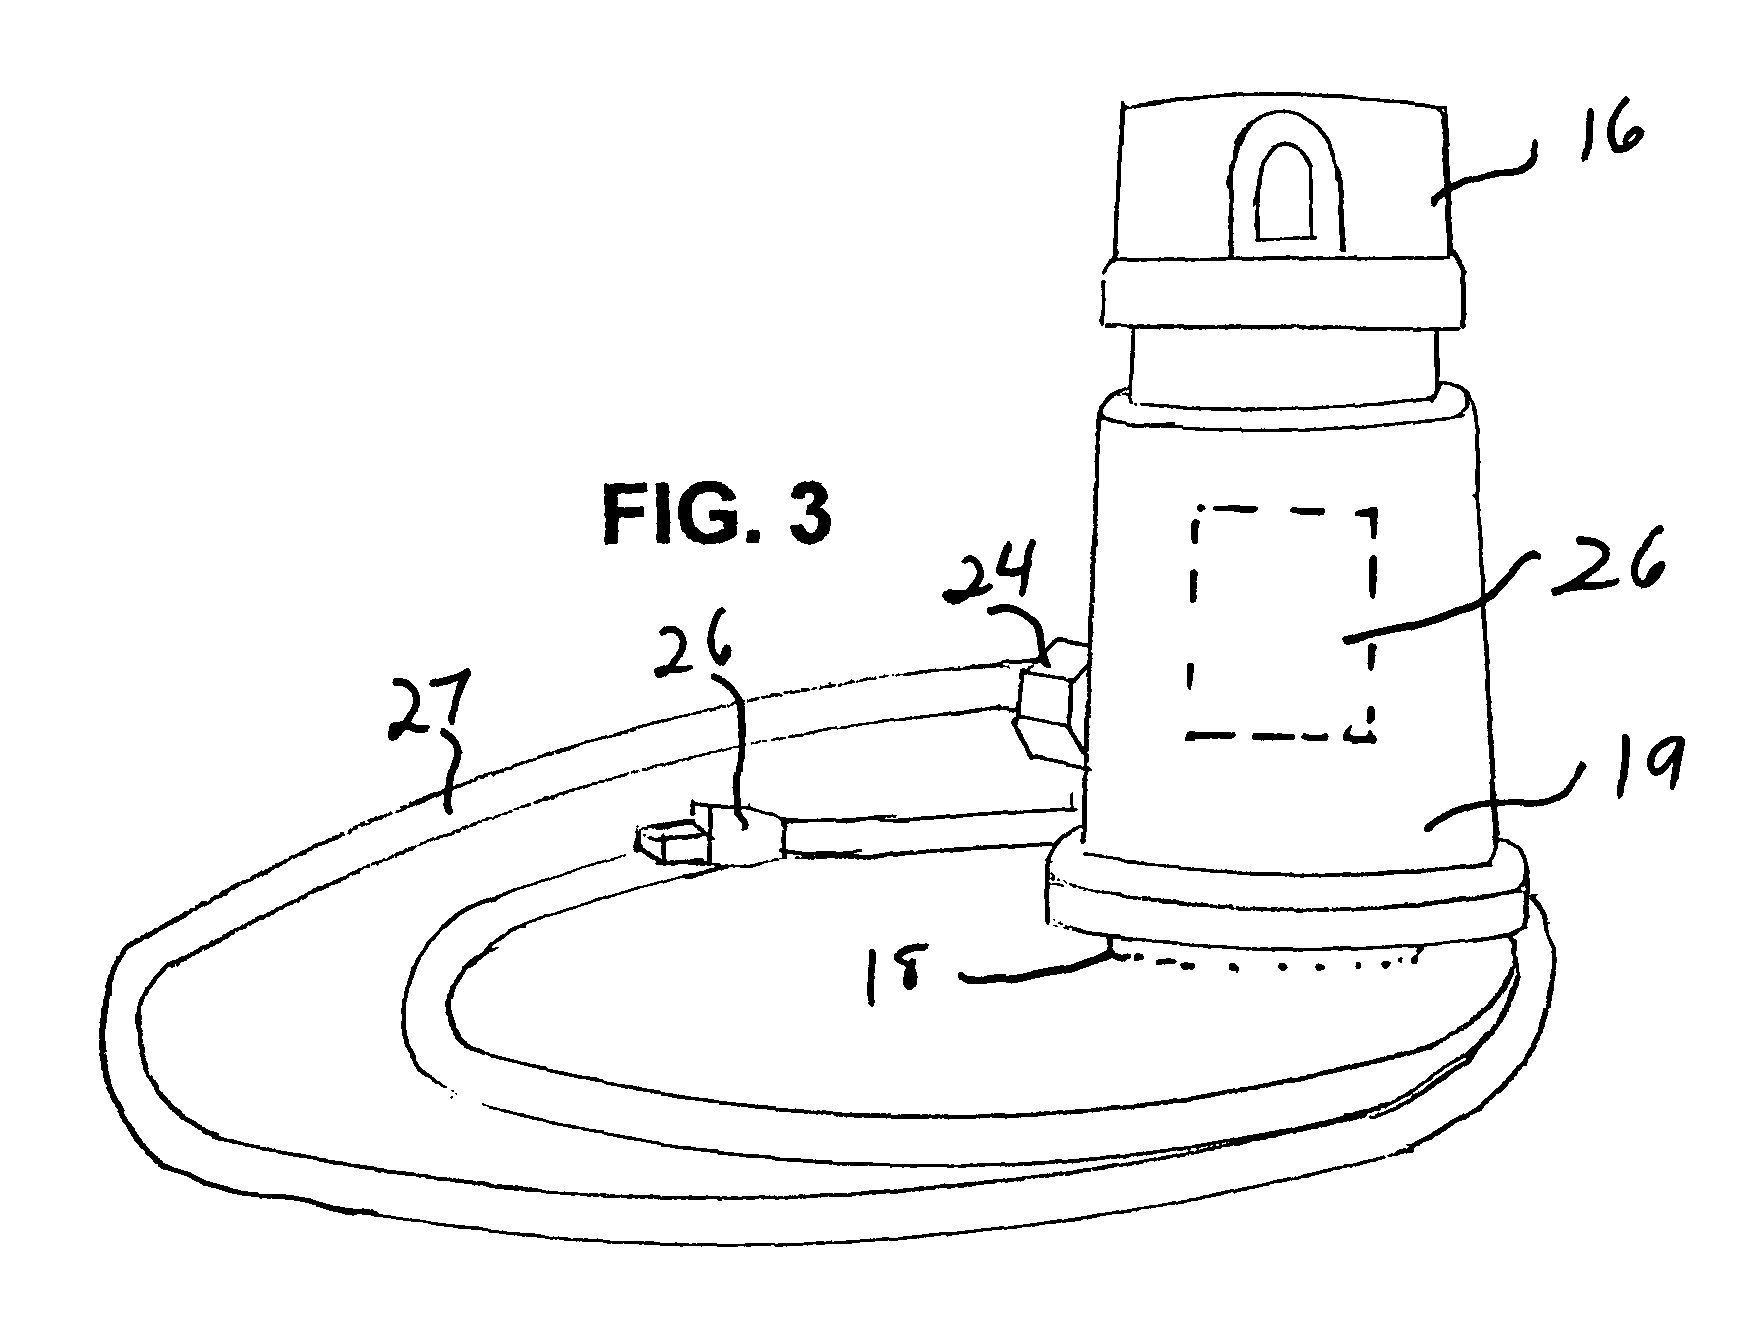 Street light auxiliary power converter for ancillary devices